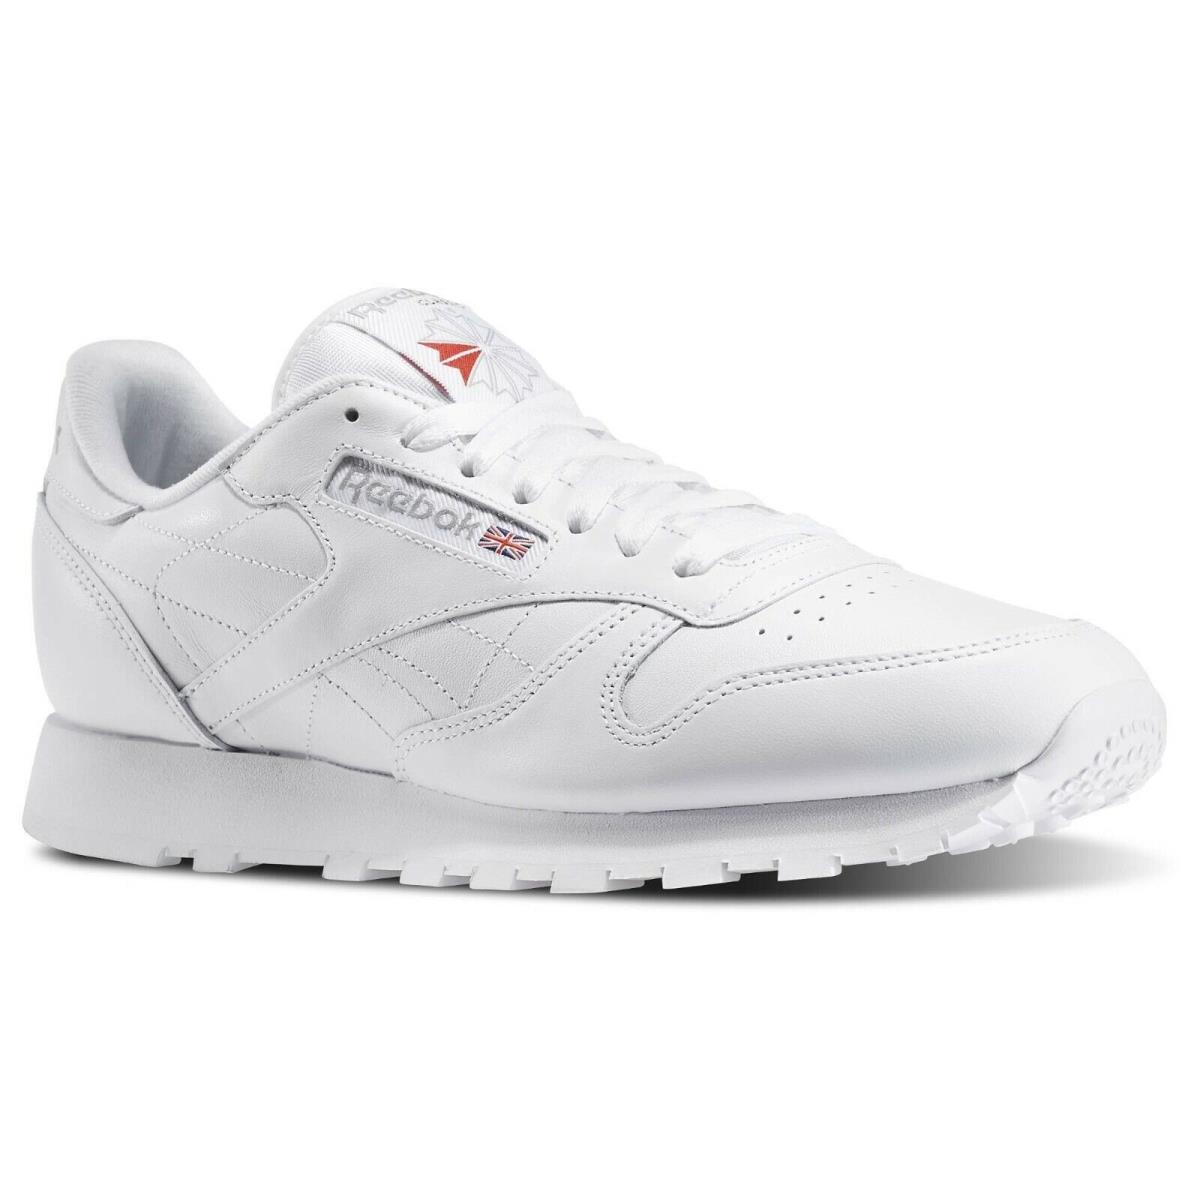 Reebok Classic Leather Men`s Shoes 9771 White / White / Grey Running Shoe